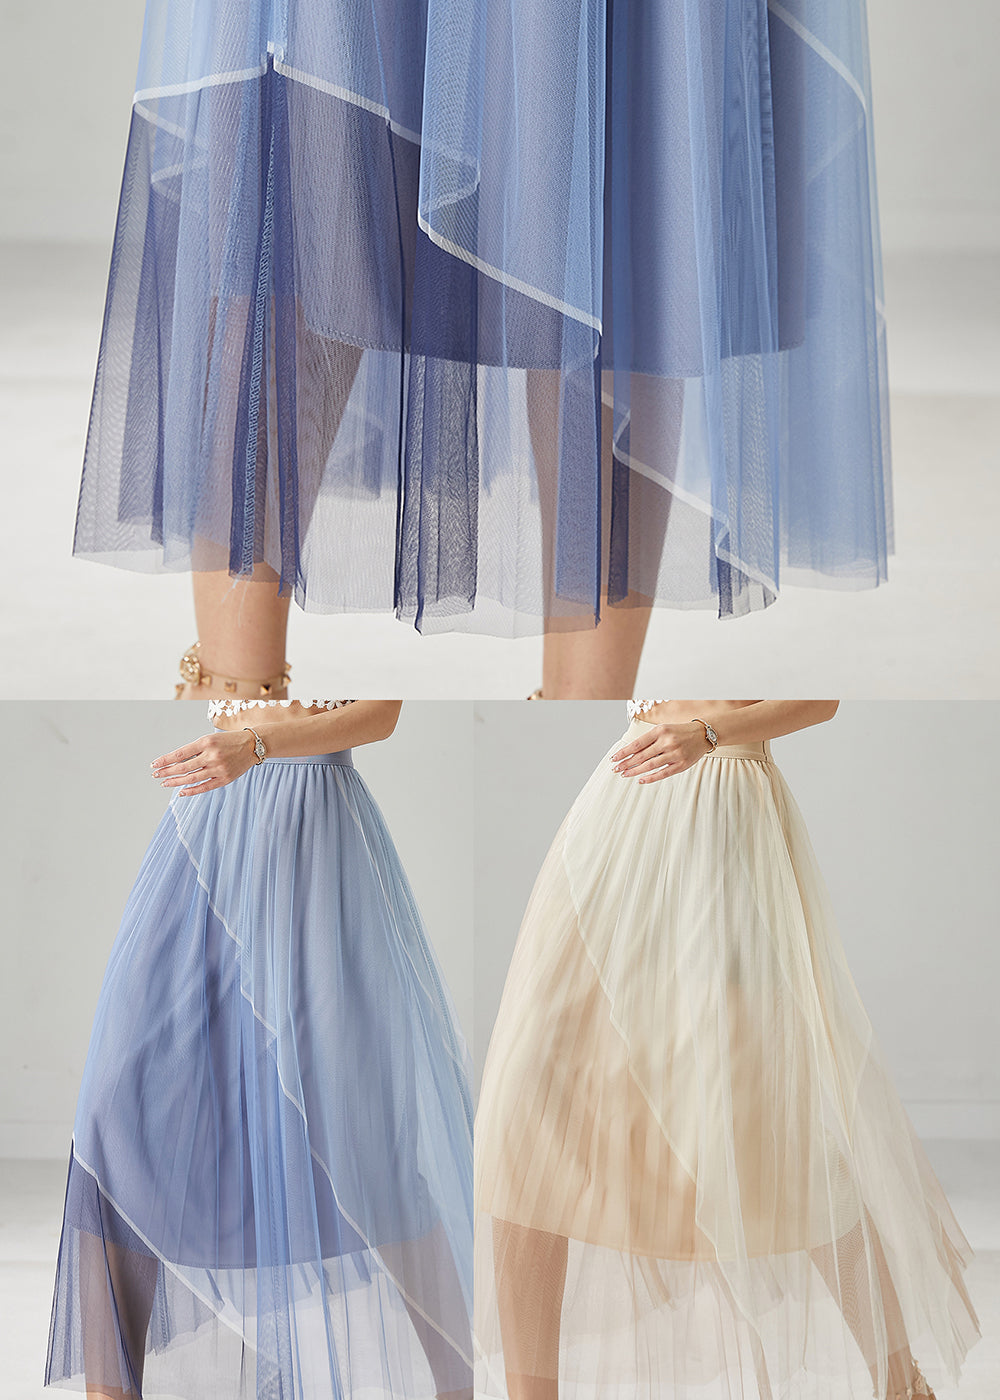 Blue Patchwork Tulle Vacation Skirts Elastic Waist Summer